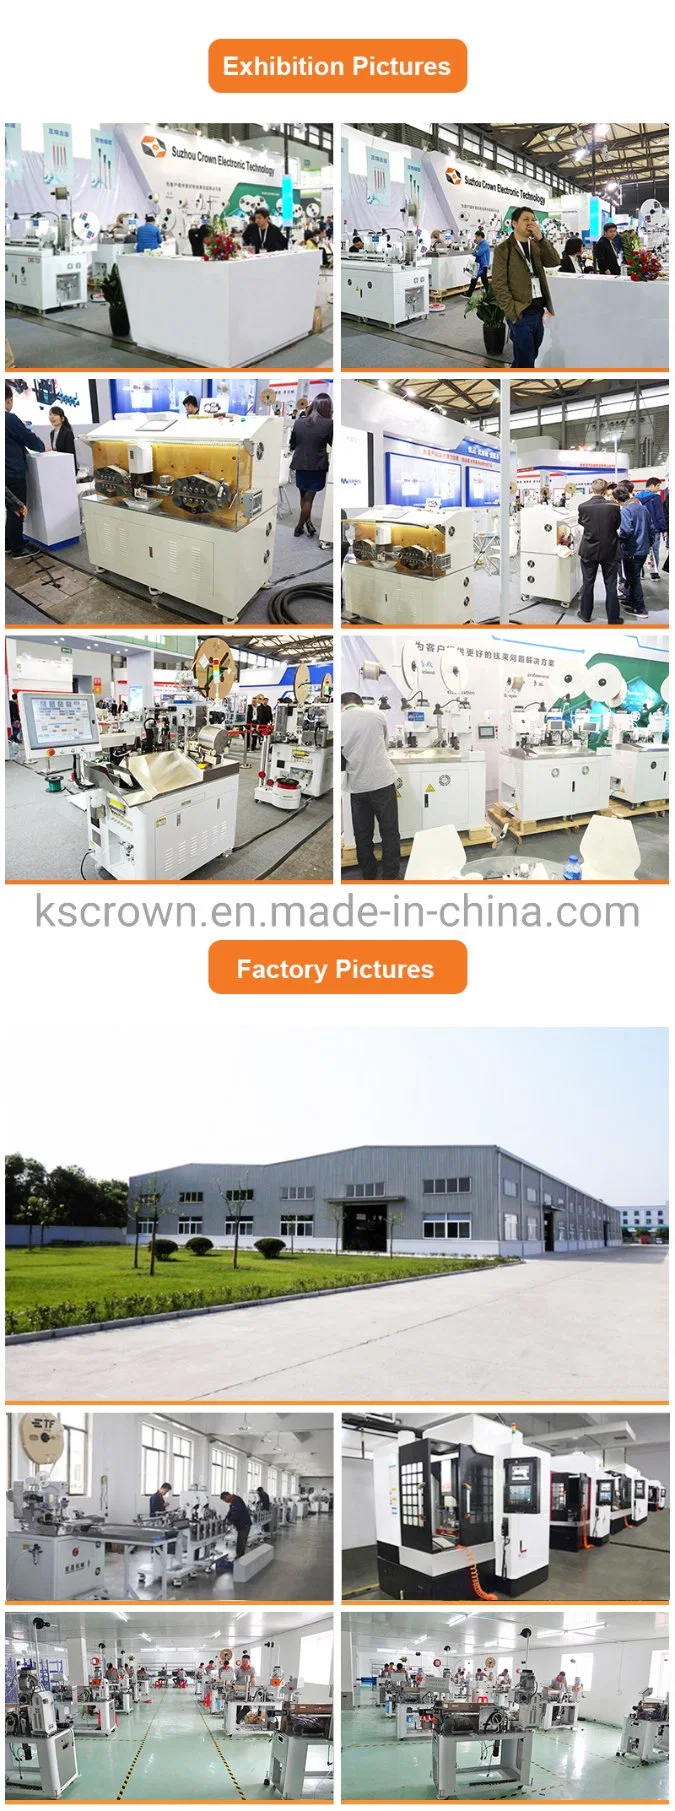 RF-V1 Hot Selling Protection Suit Waterproof Hot Air Seam Sealing Machine Supplier in China